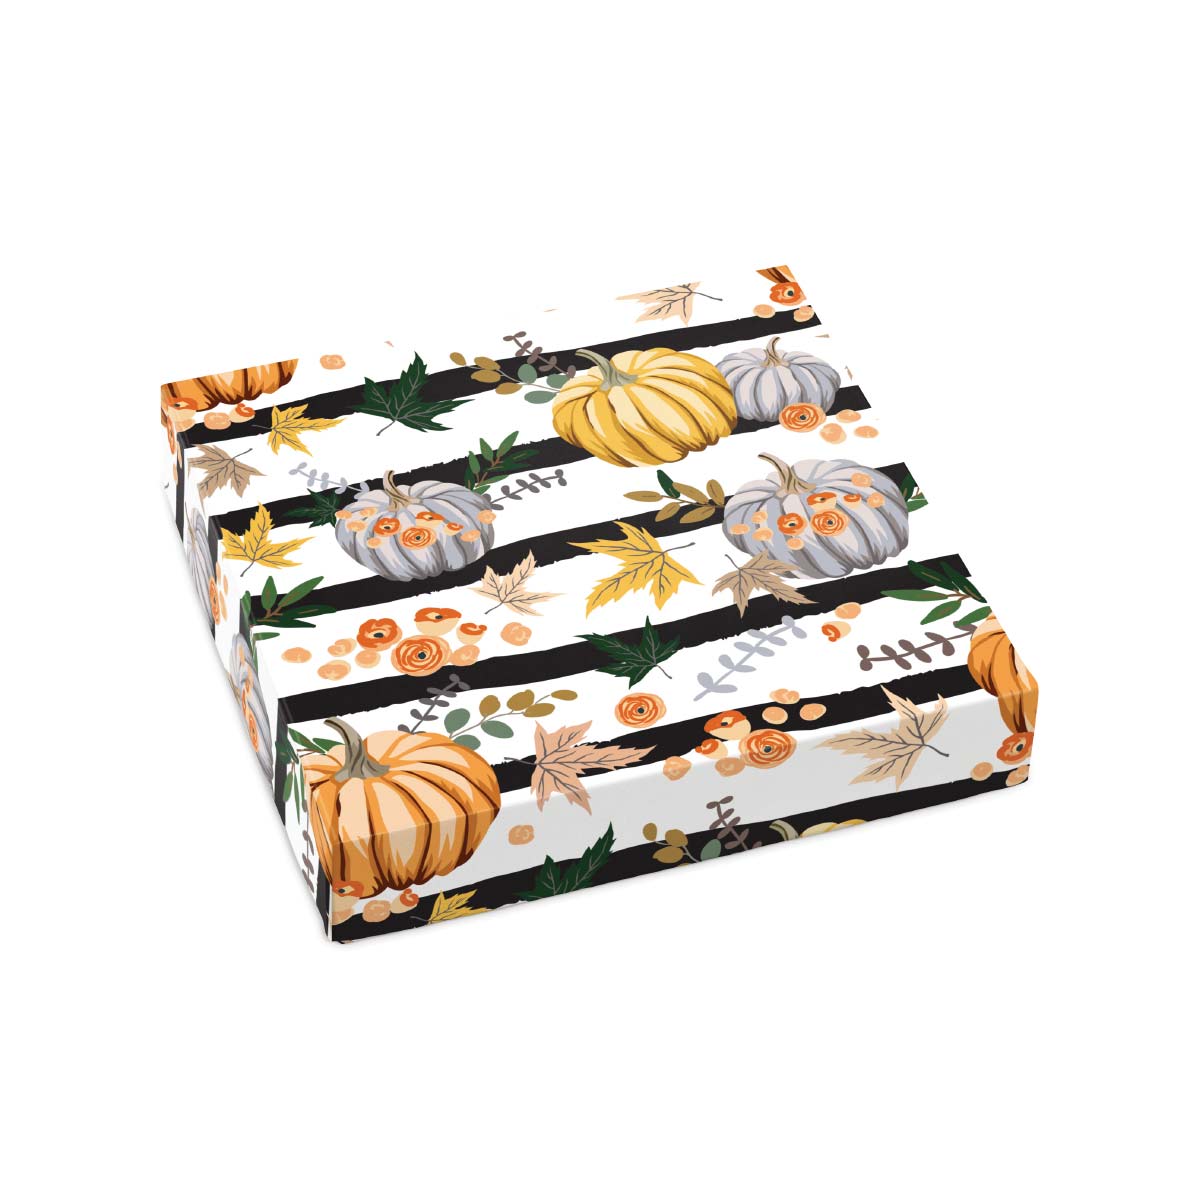 Fall Themed Box Cover for 9 Piece Holiday Assortment